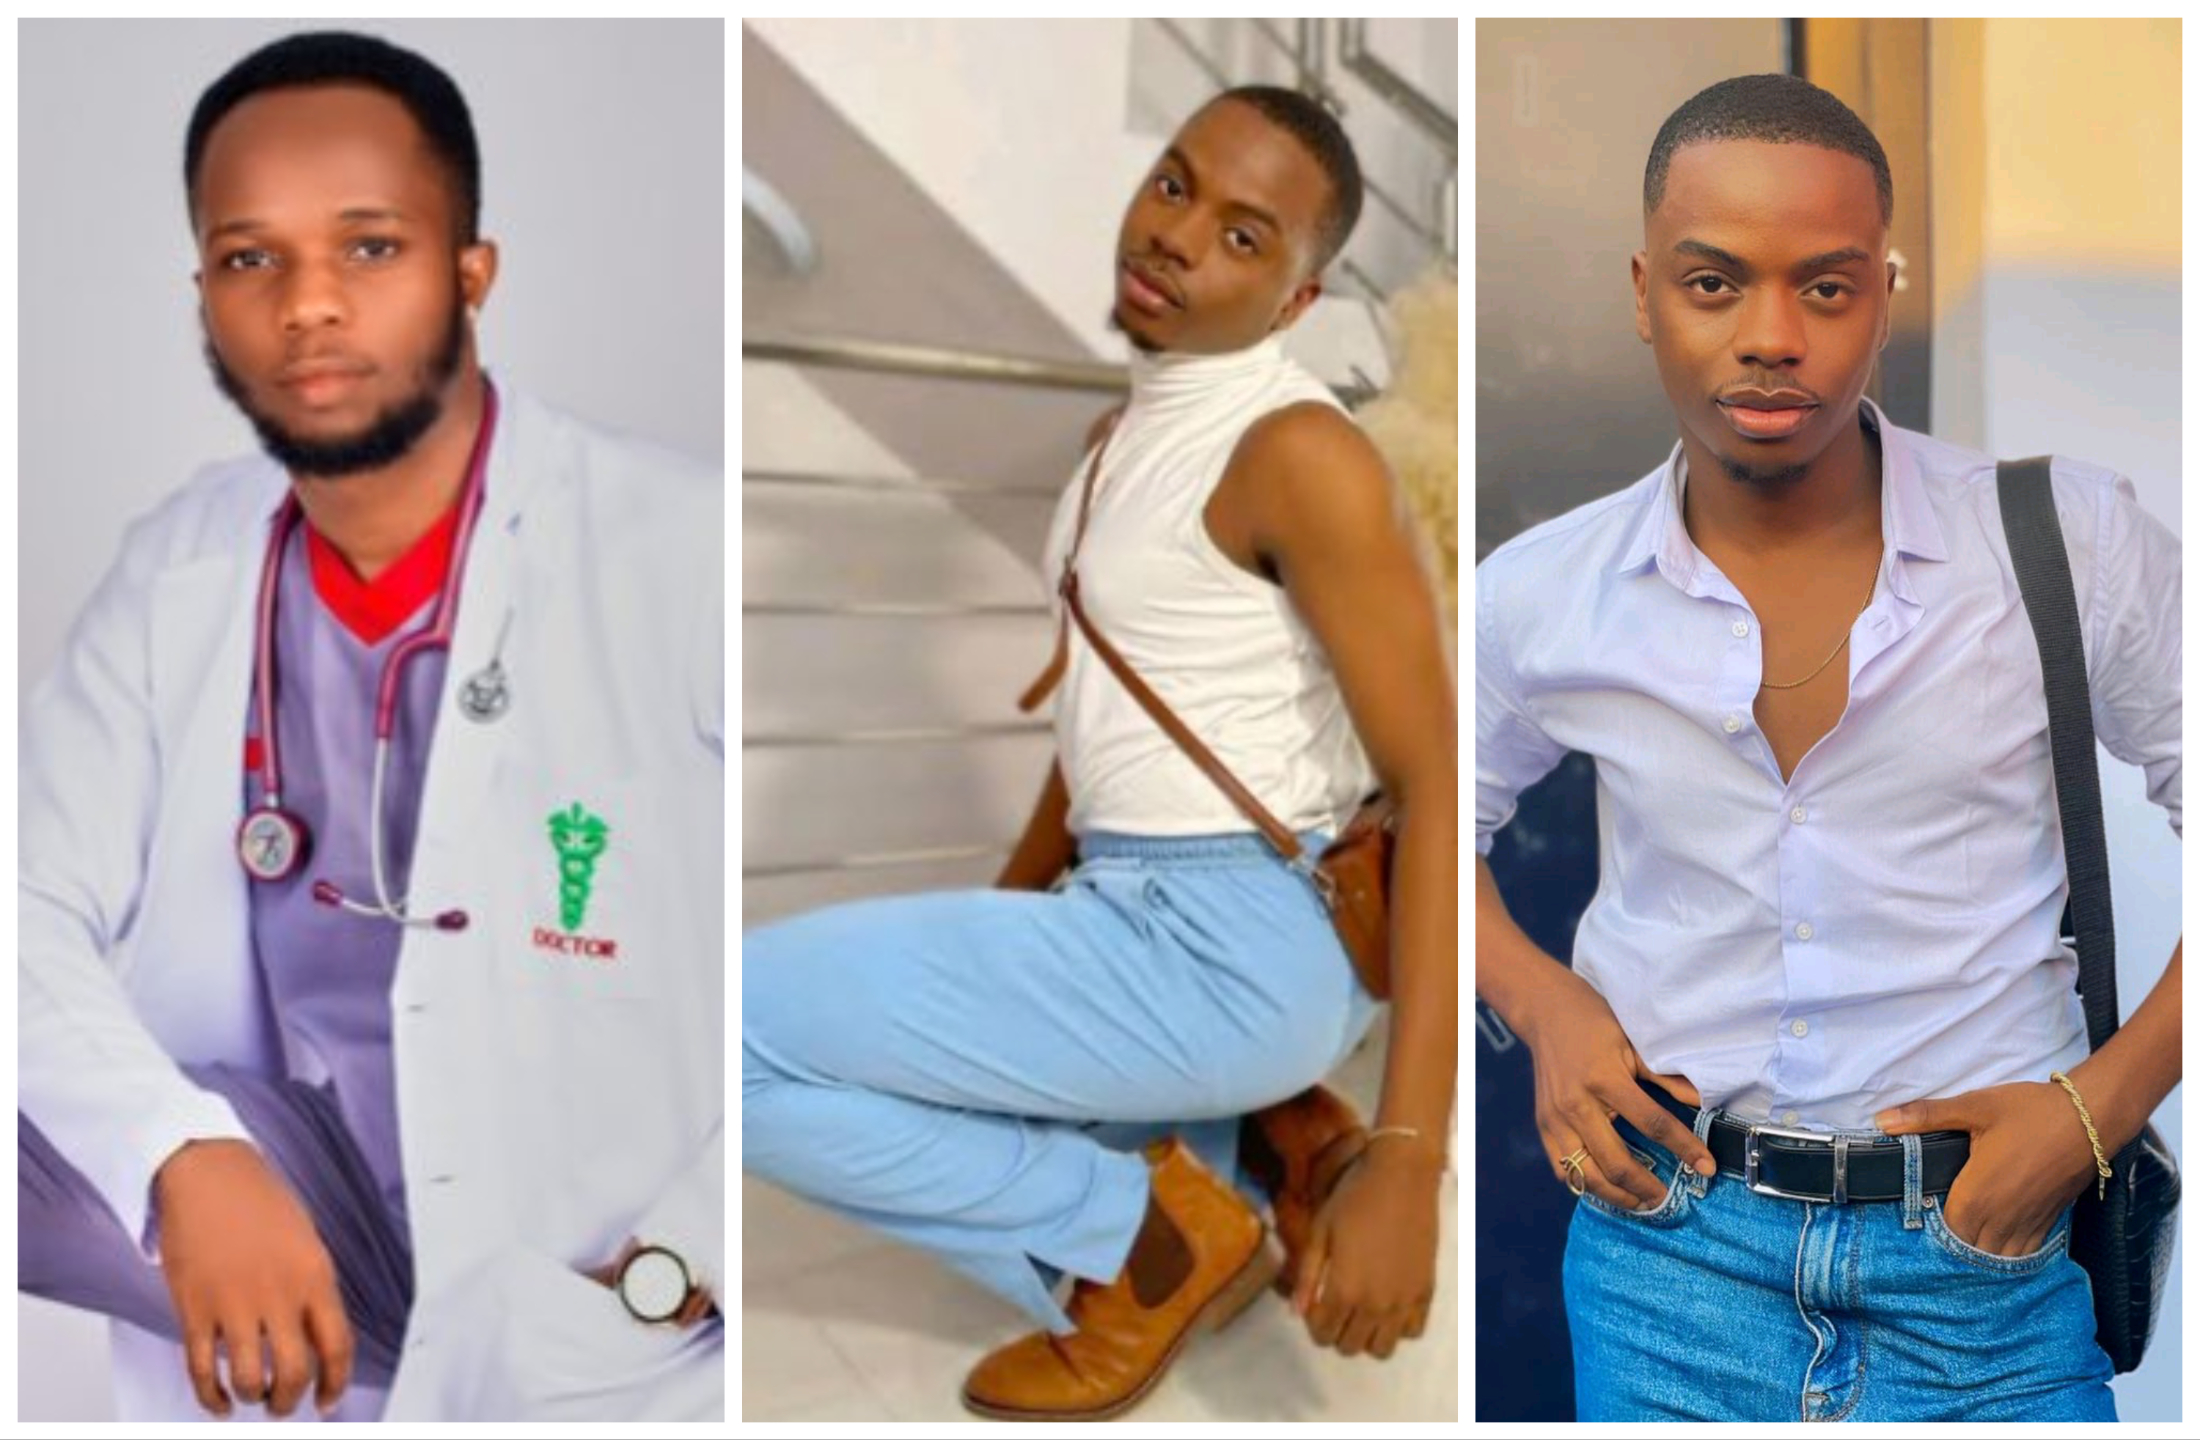 Intercourse Educator, Dr Penking slams Influencer Enioluwa over his pose in new image